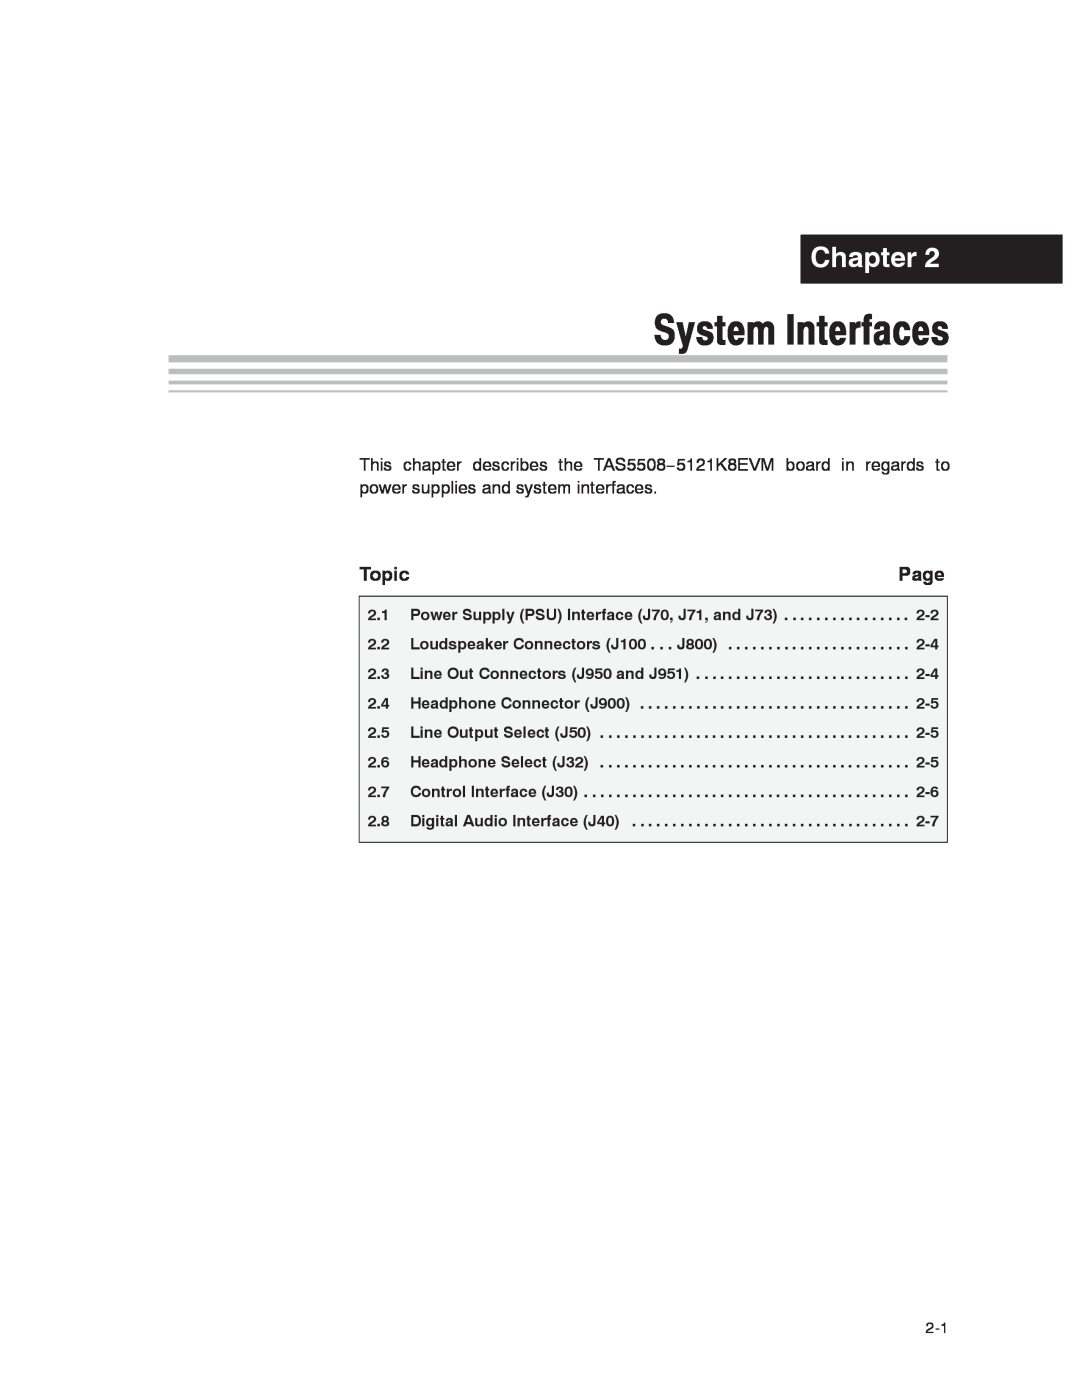 Texas Instruments TAS5121 System Interfaces, Chapter, Page, Topic, Power Supply PSU Interface J70, J71, and J73, J800 